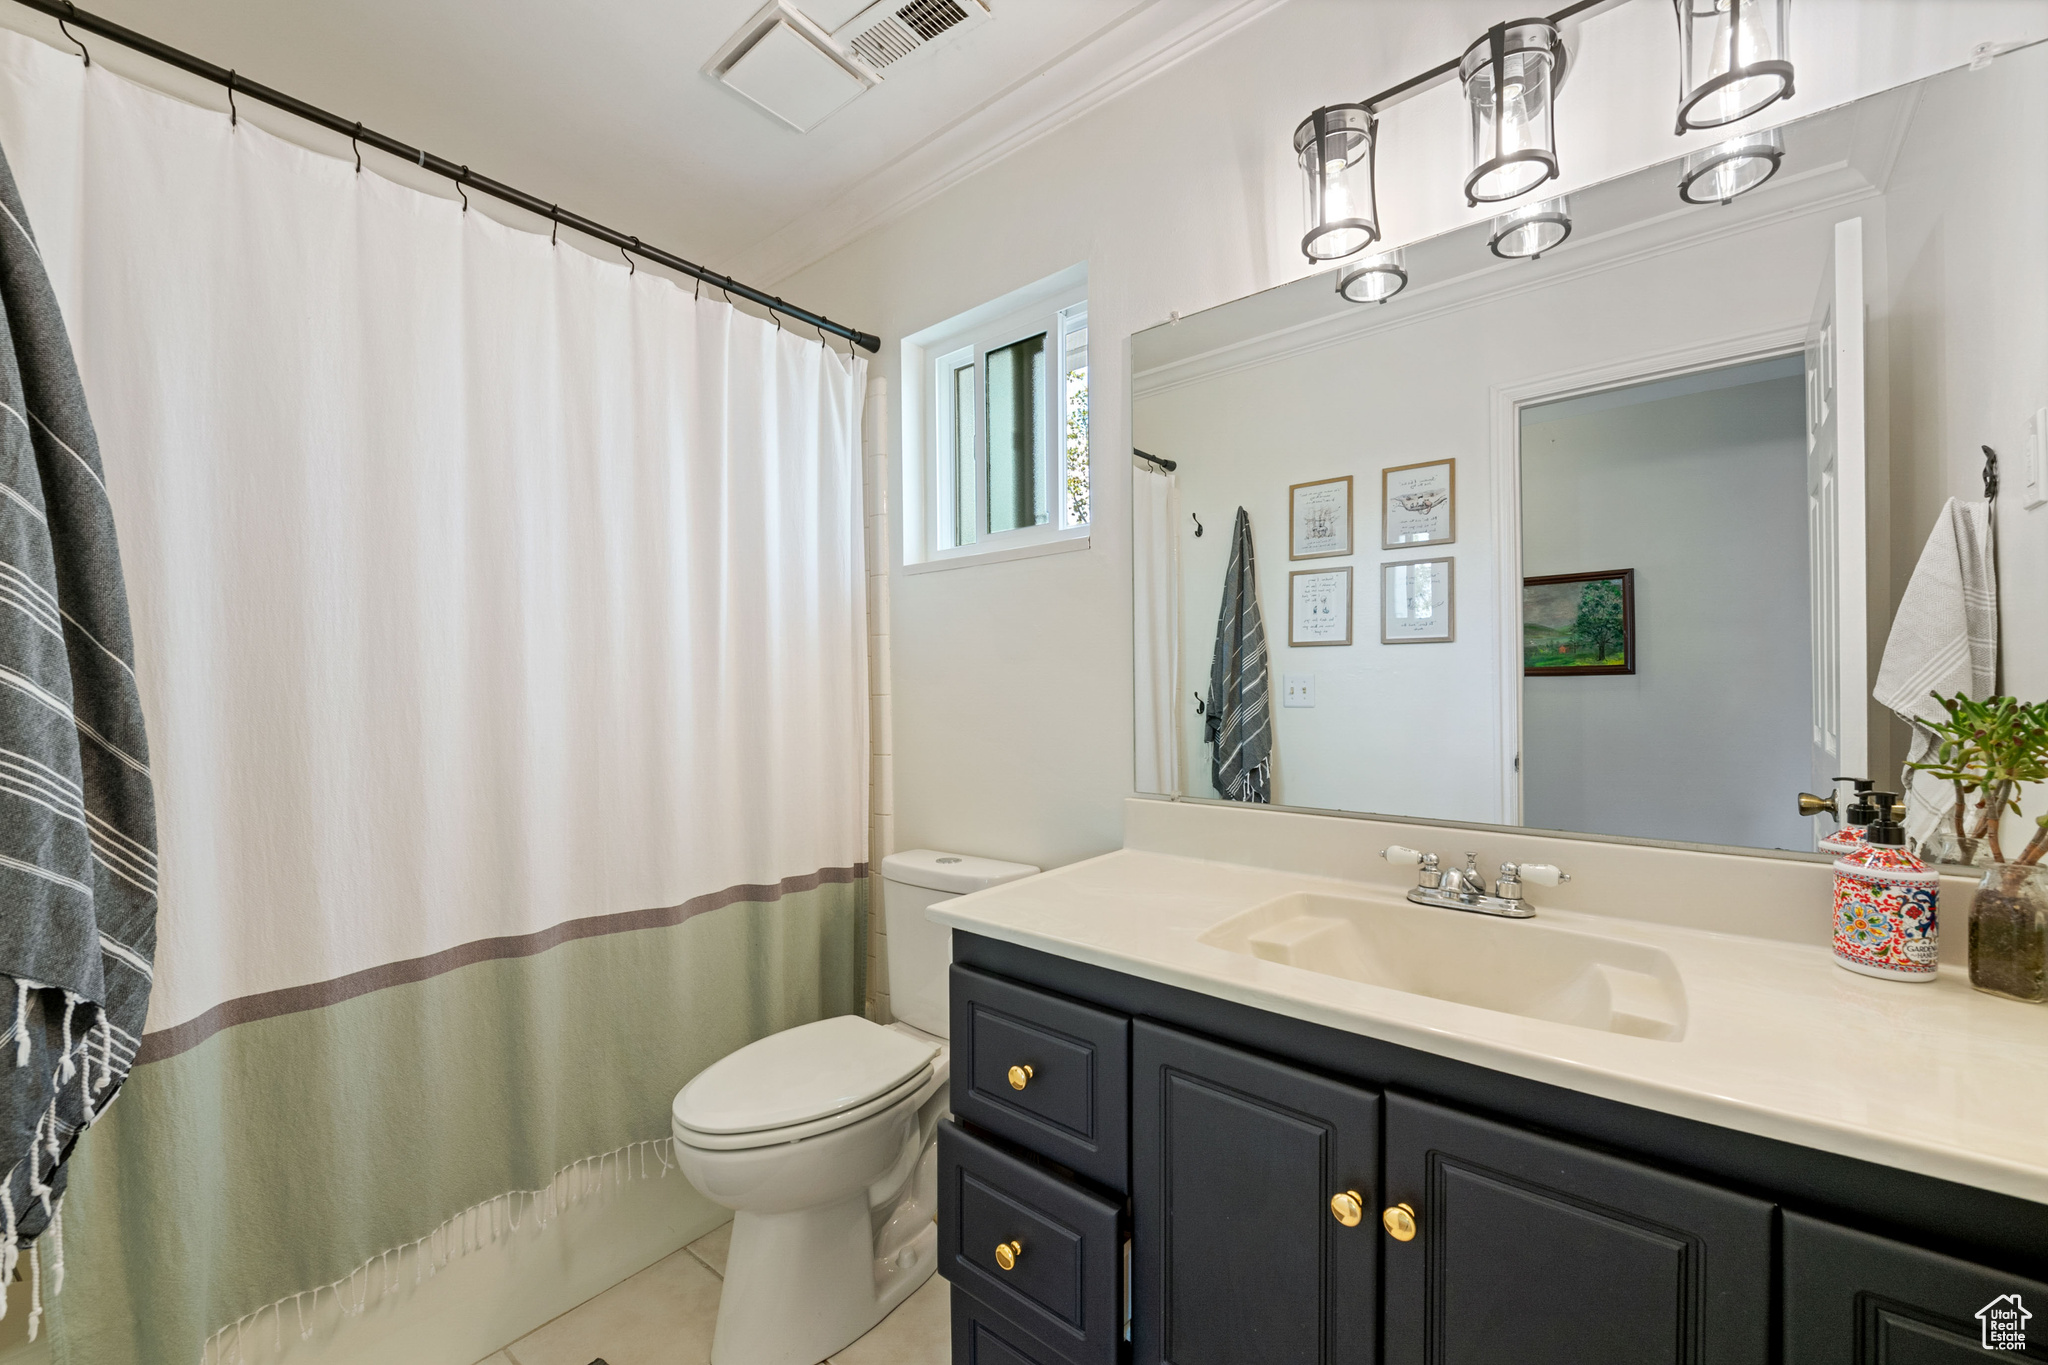 Bathroom with crown molding, toilet, tile floors, and large vanity